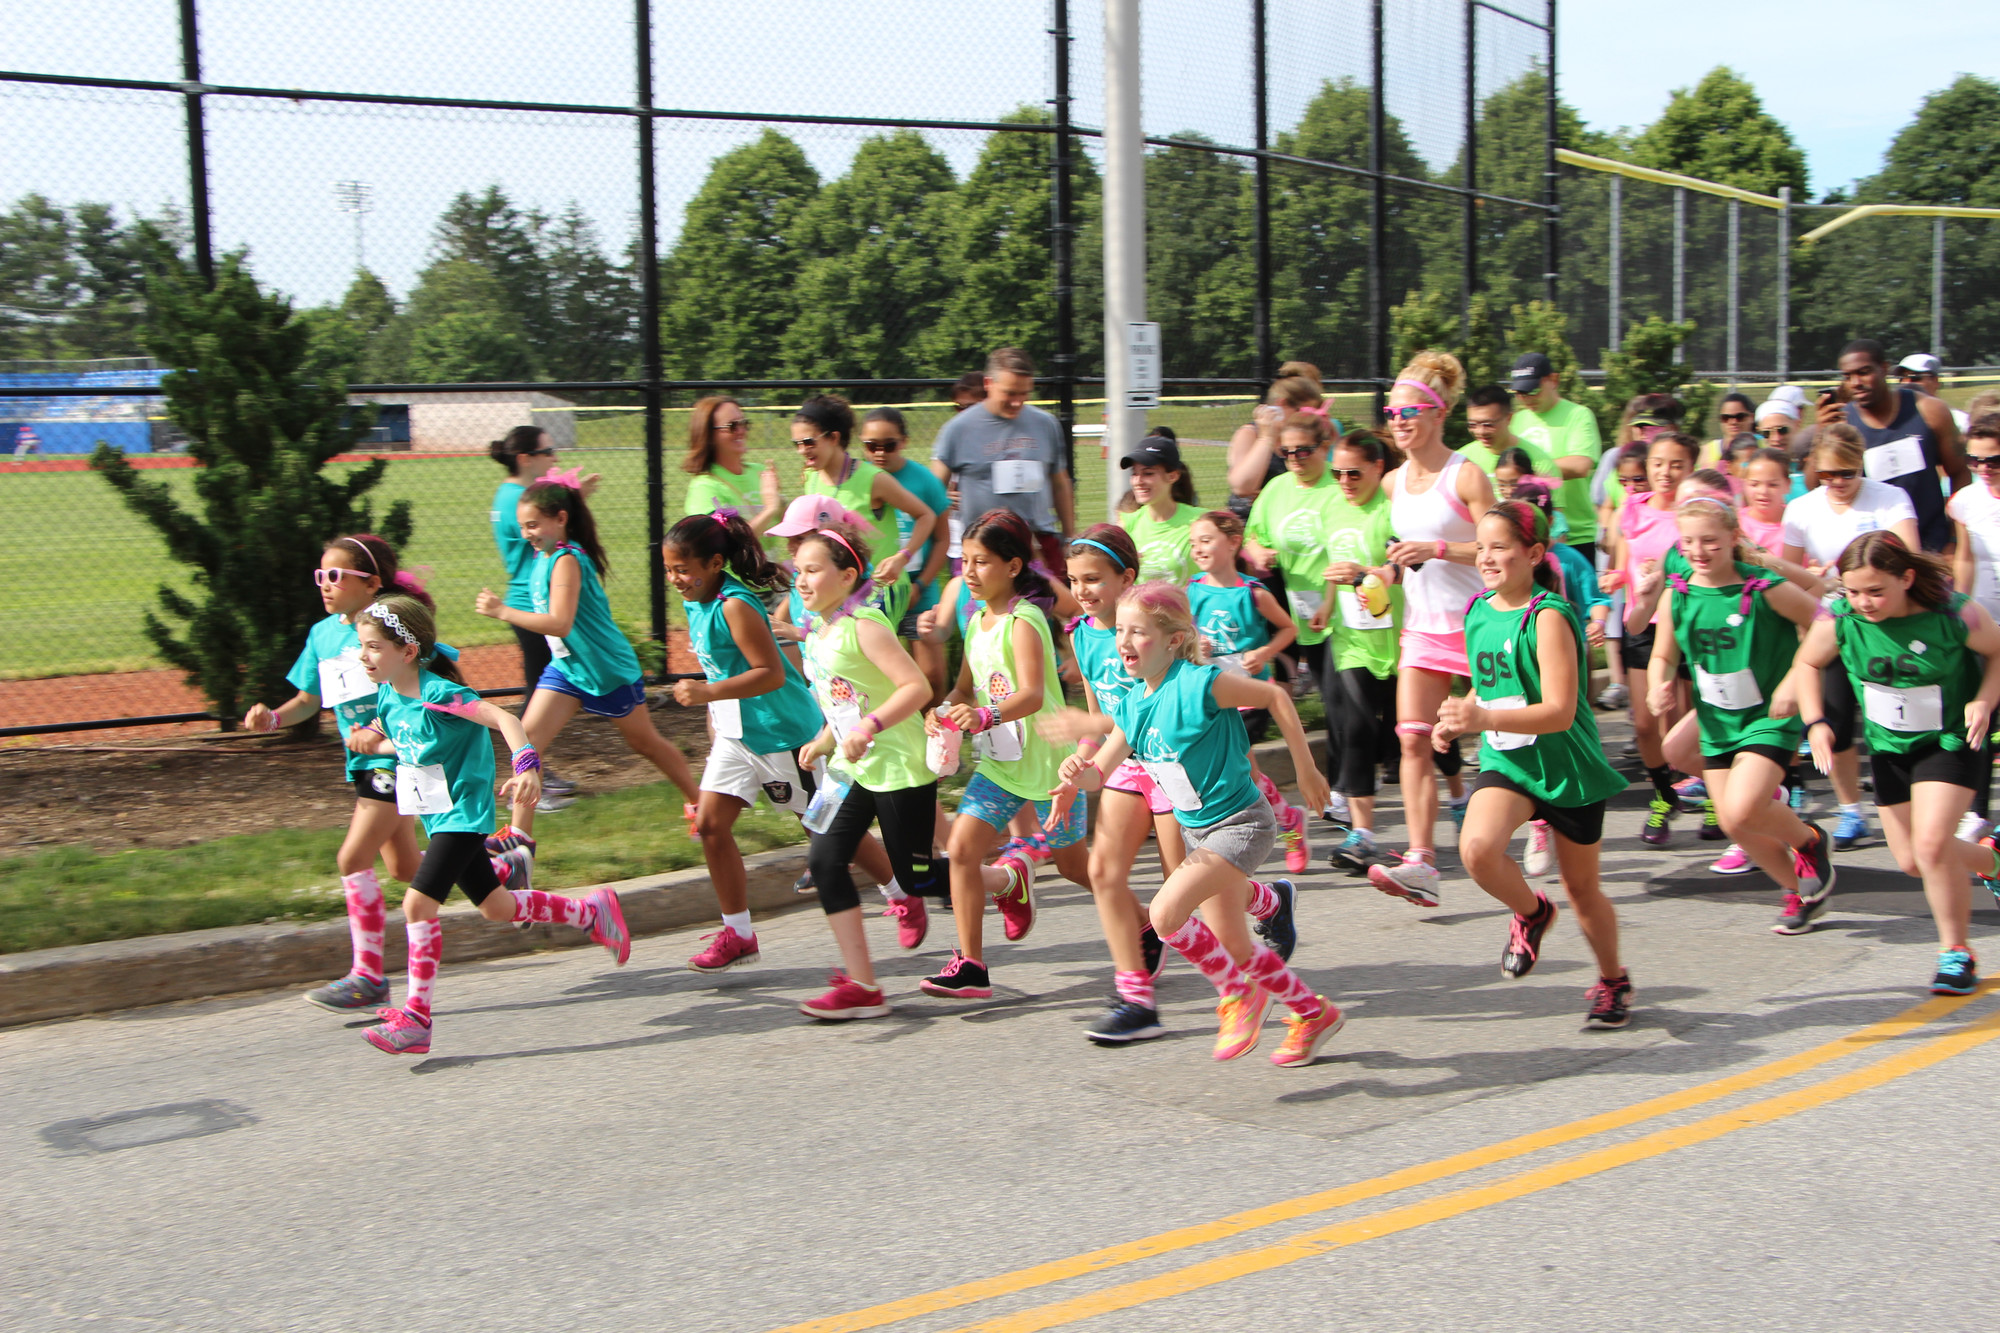 These girls were deteremined to have fun on the run. There were over 100 young girls who took off at the starting line.